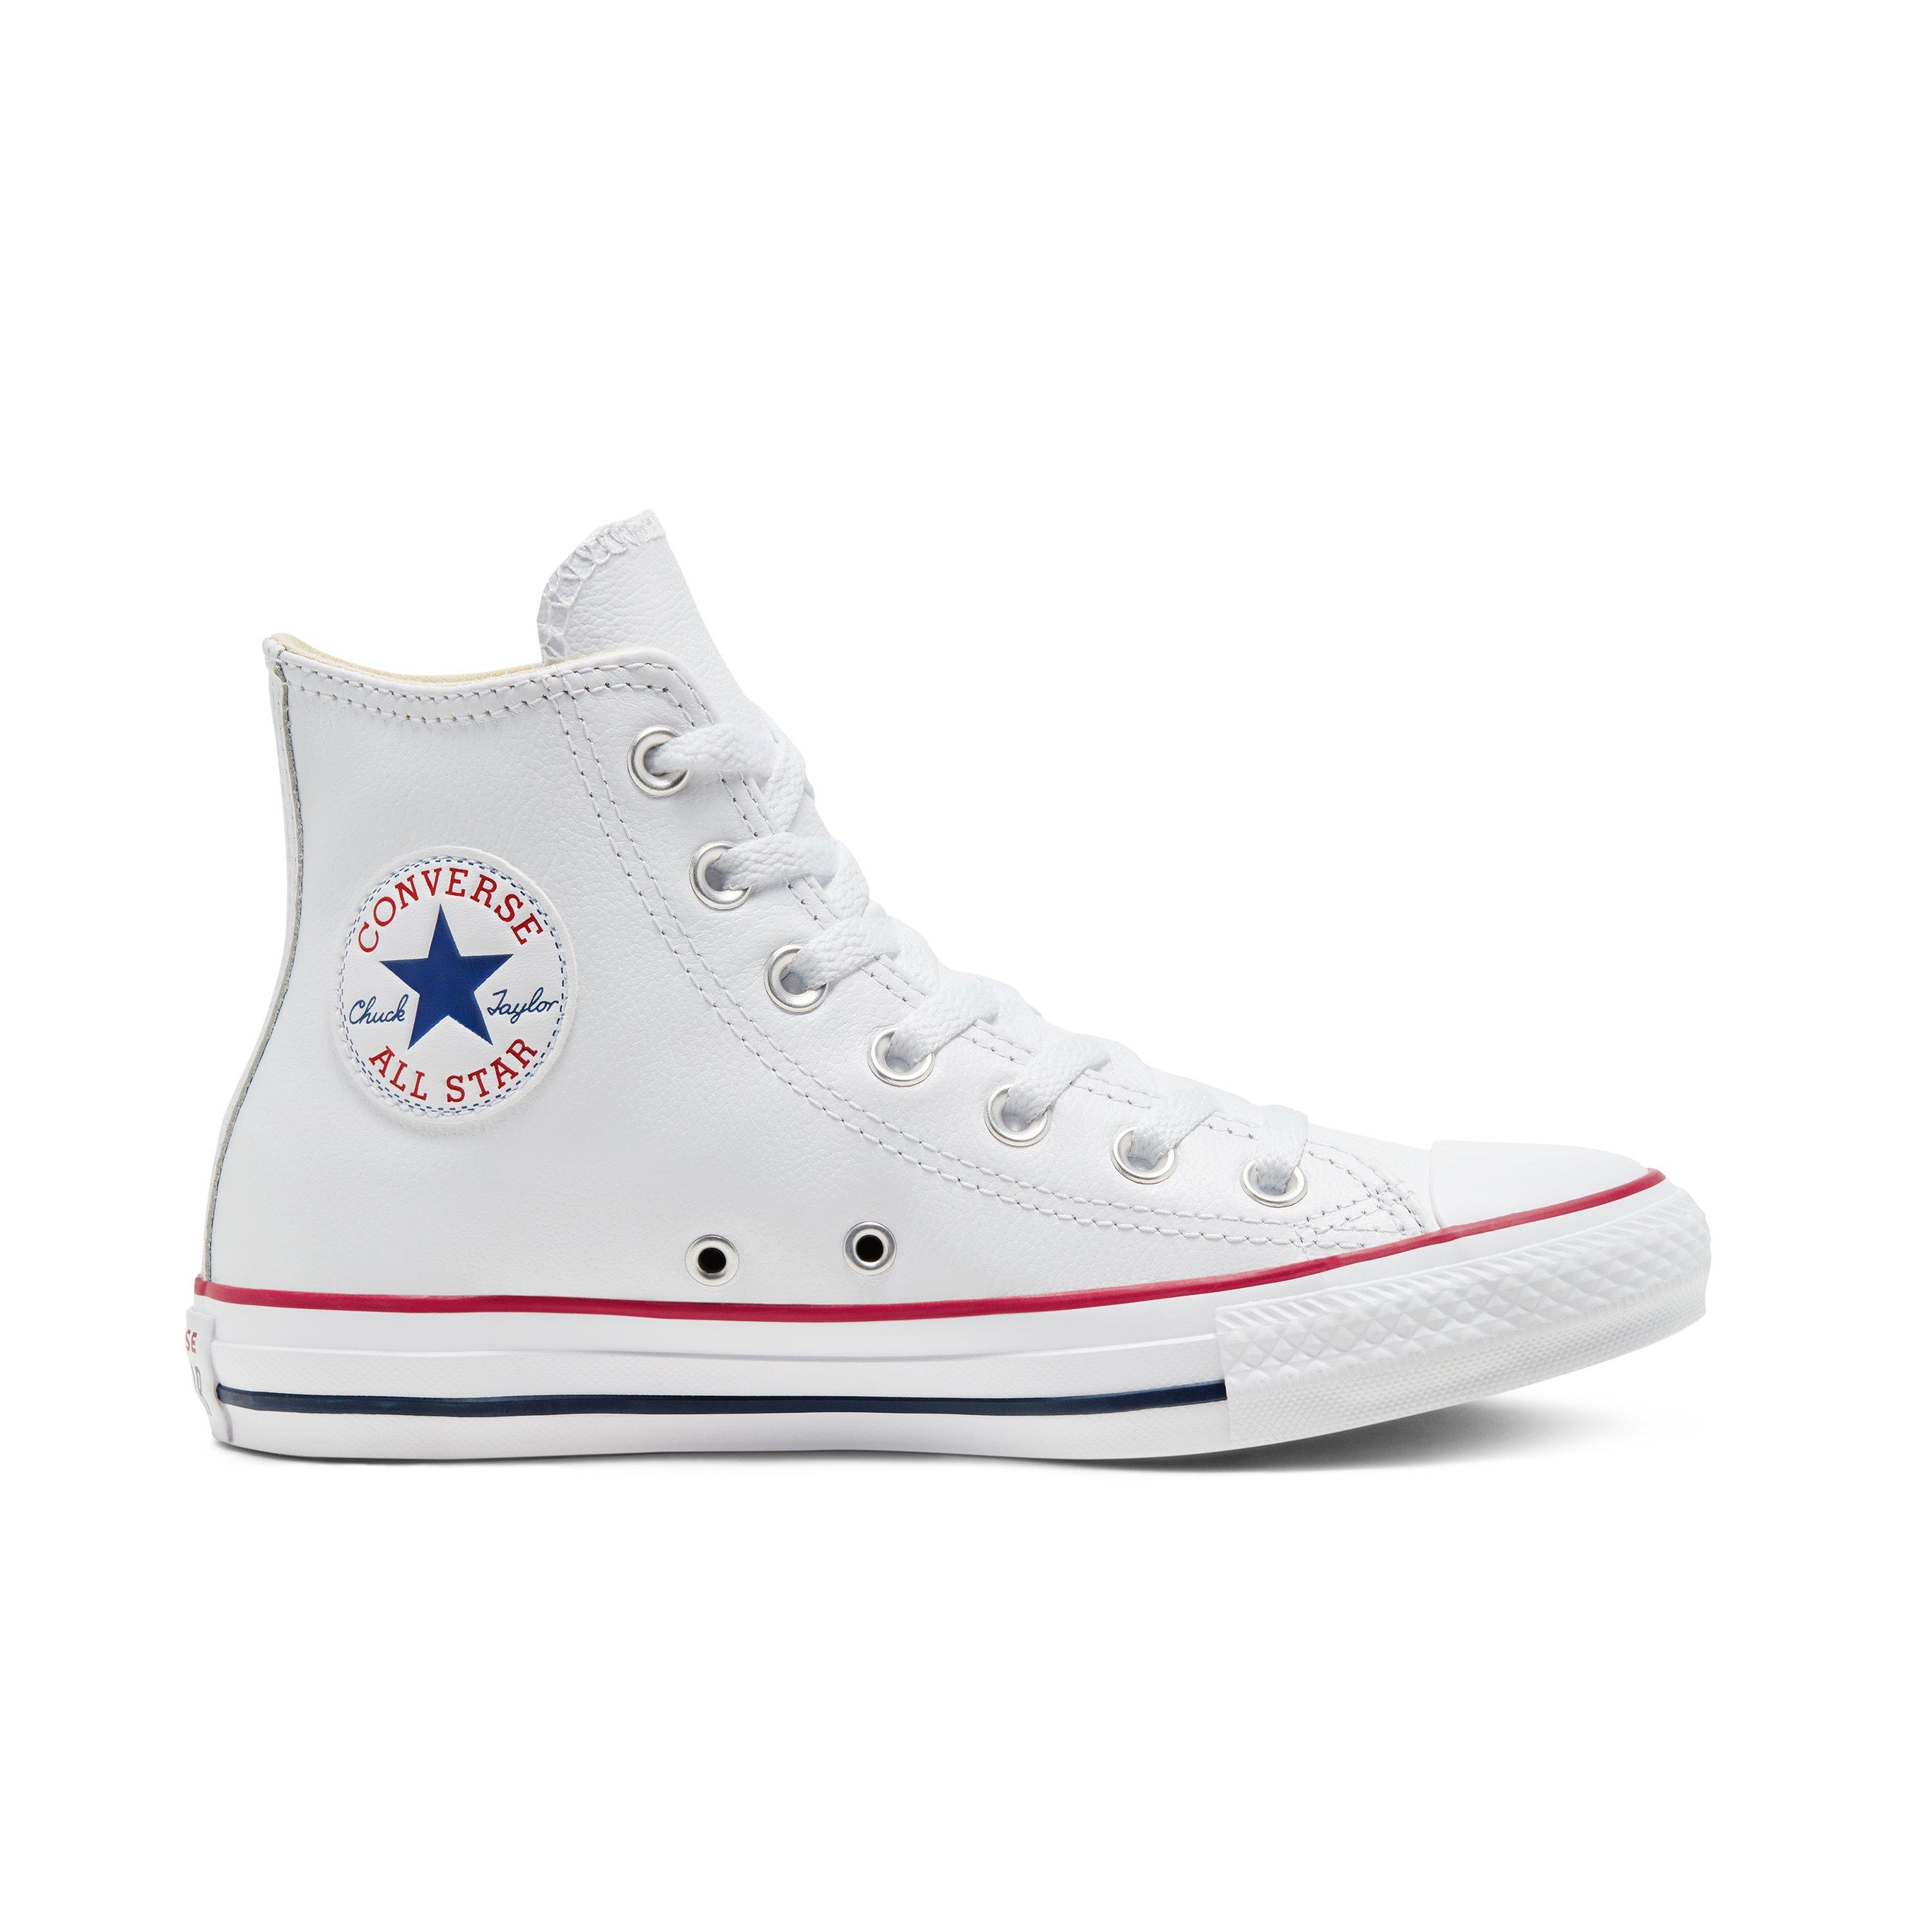 Converse Chuck Taylor All Stars Leather High-Top Sneaker - Men's